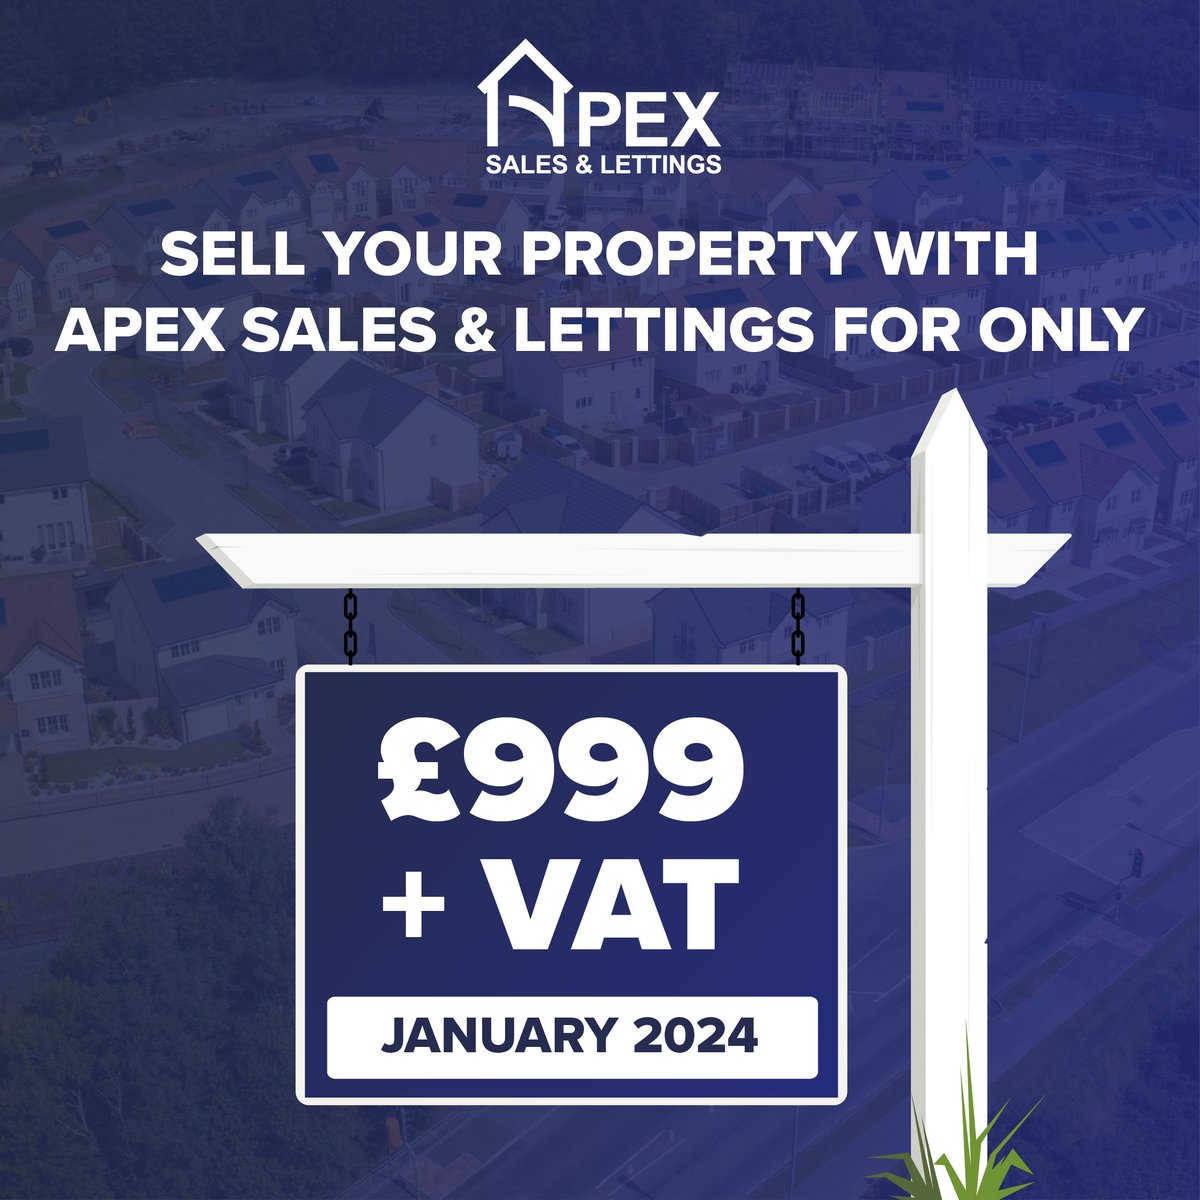 Selling your home is made easy and cost-effective with Lettings by Apex! 🏡💰 Say goodbye to excessive fees and hello to savings! Sell from just £999!

#LettingsByApex #SellSmart #SaveOnFees #SmartSelling #UnlockYourHomeValue #SellWithSavings #ApexPropertyServices
#SellFrom999